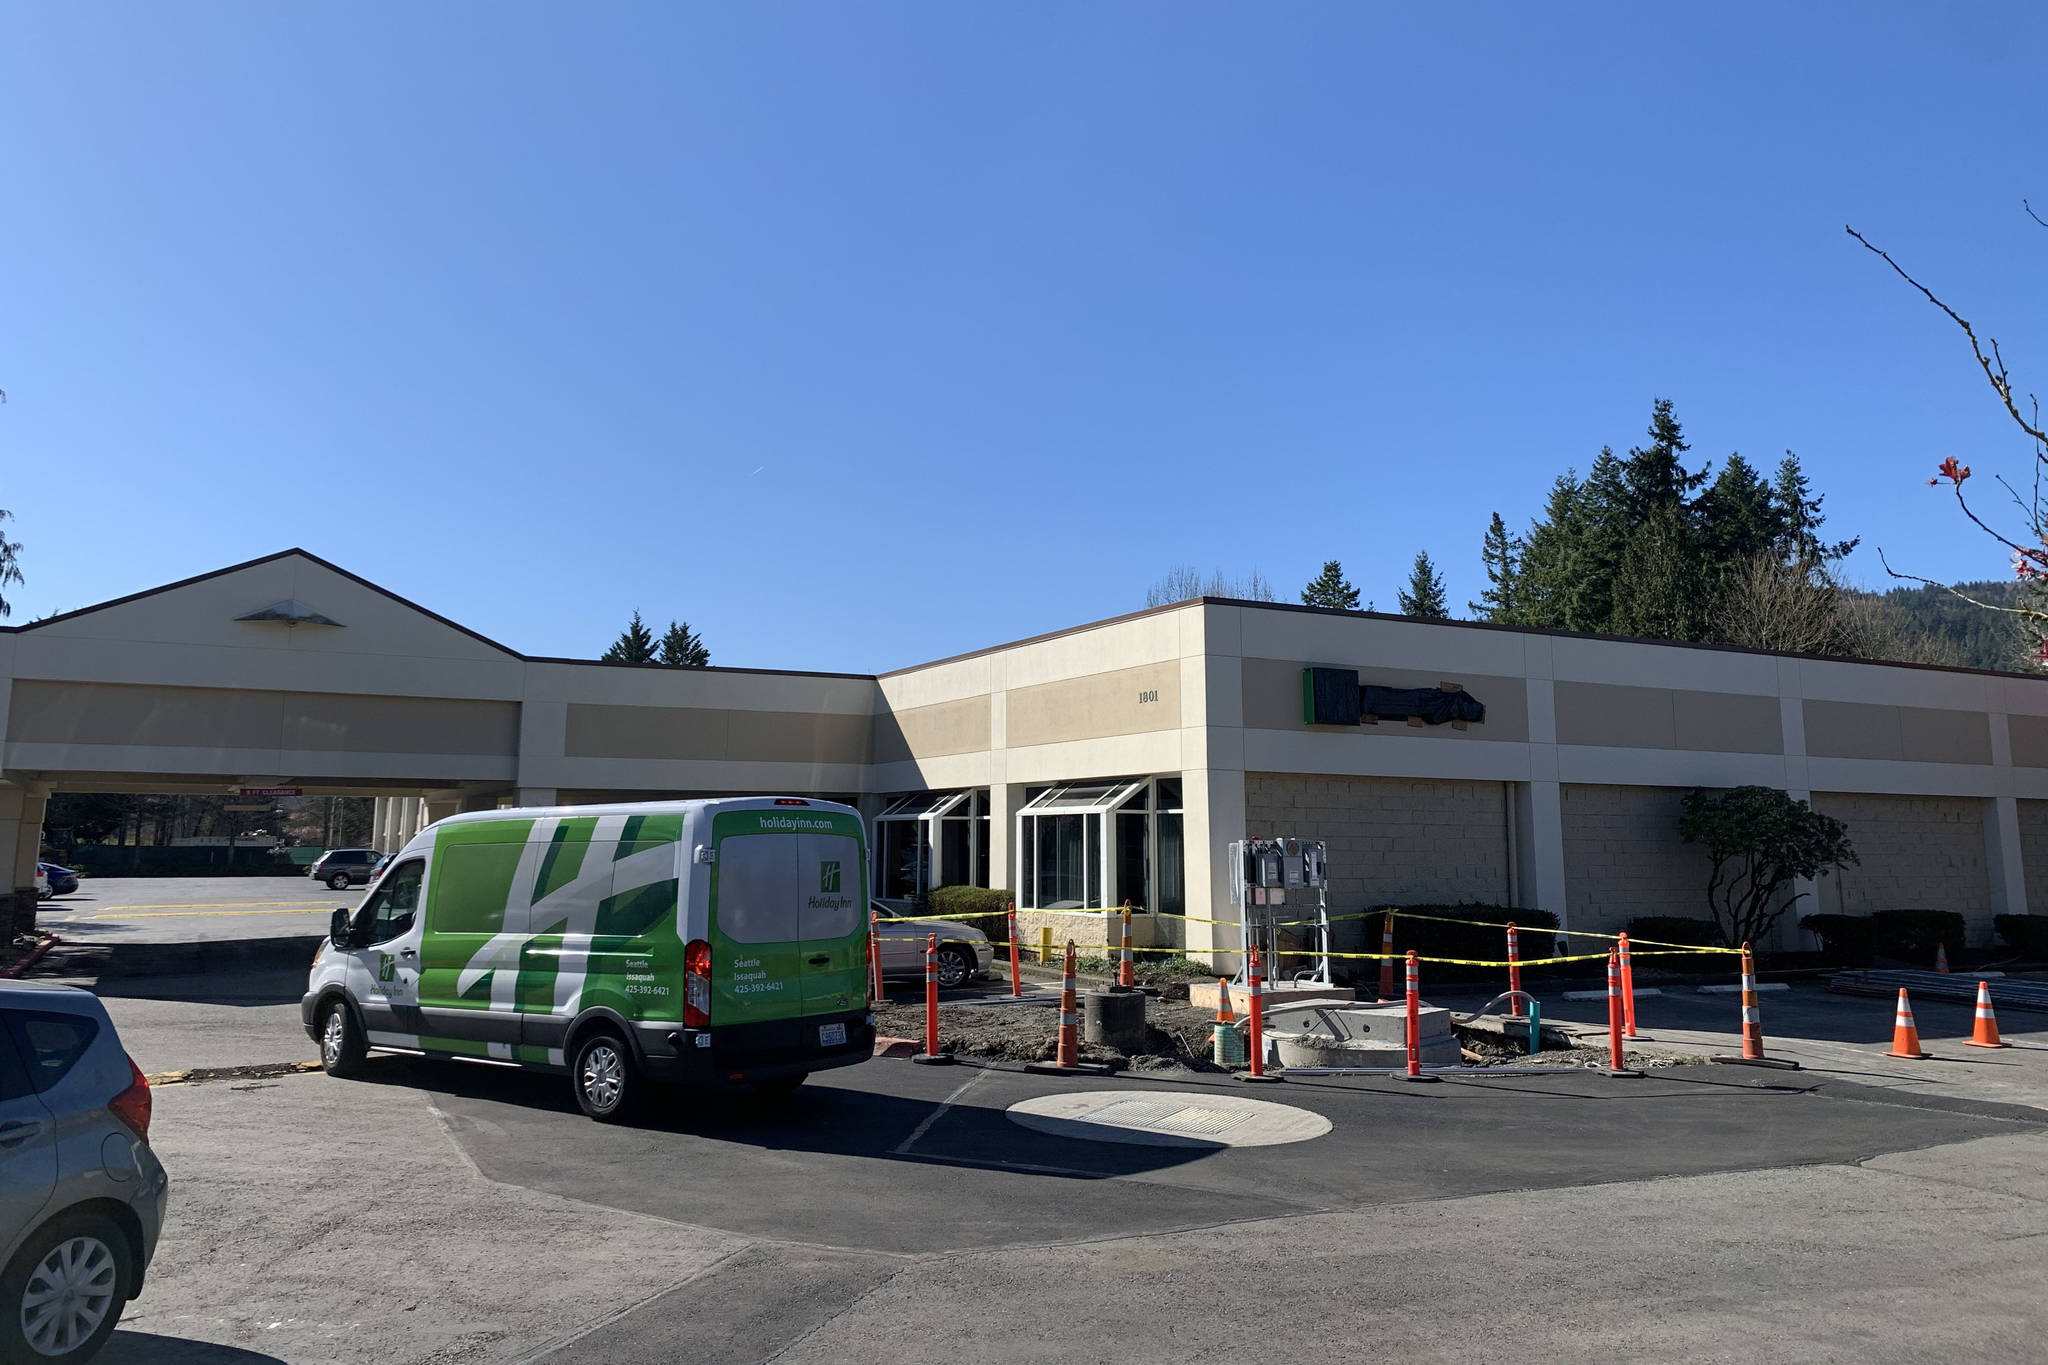 King County’s new Issaquah quarantine location on March 16, 2020. The County is leasing the former Holiday Inn motel as a quarantine site for coronavirus patient. Natalie DeFord / Staff Photo.